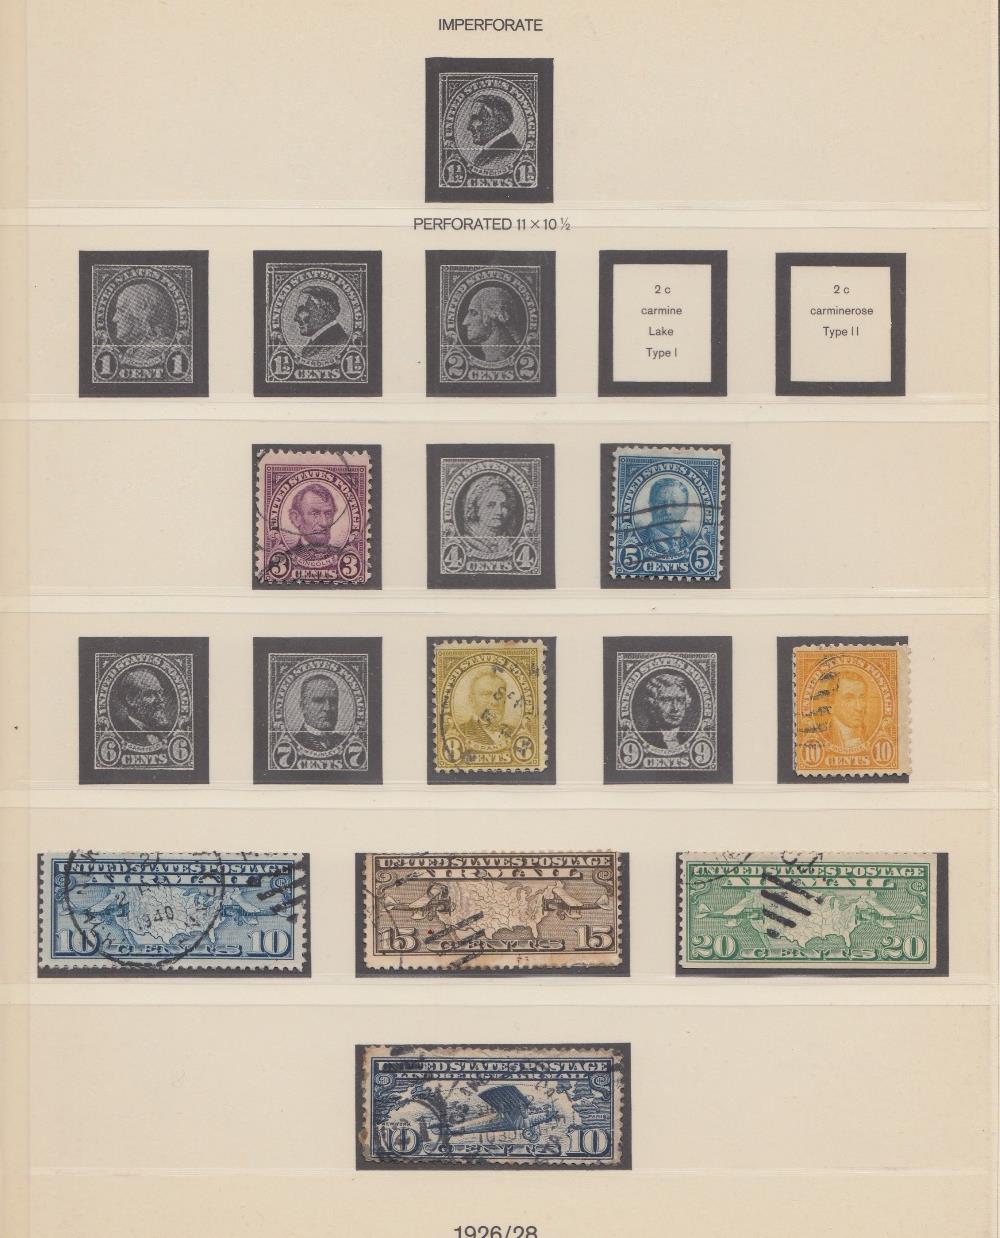 STAMPS USA Lindner hinge-less printed album with issues from 1847 to 1936, mostly used issues, - Image 8 of 8